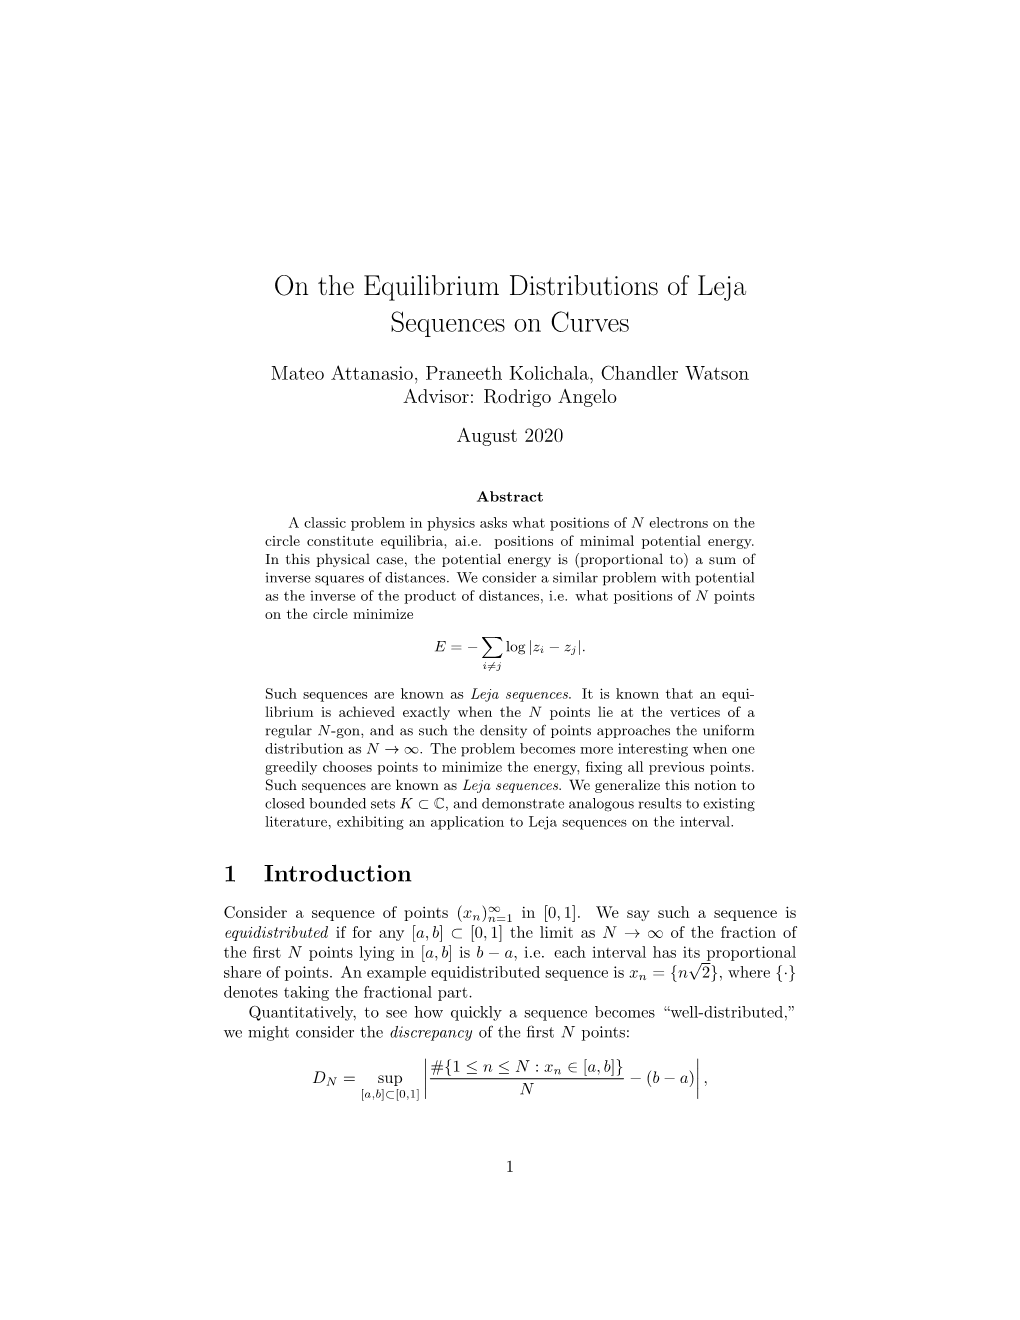 On the Equilibrium Distributions of Leja Sequences on Curves